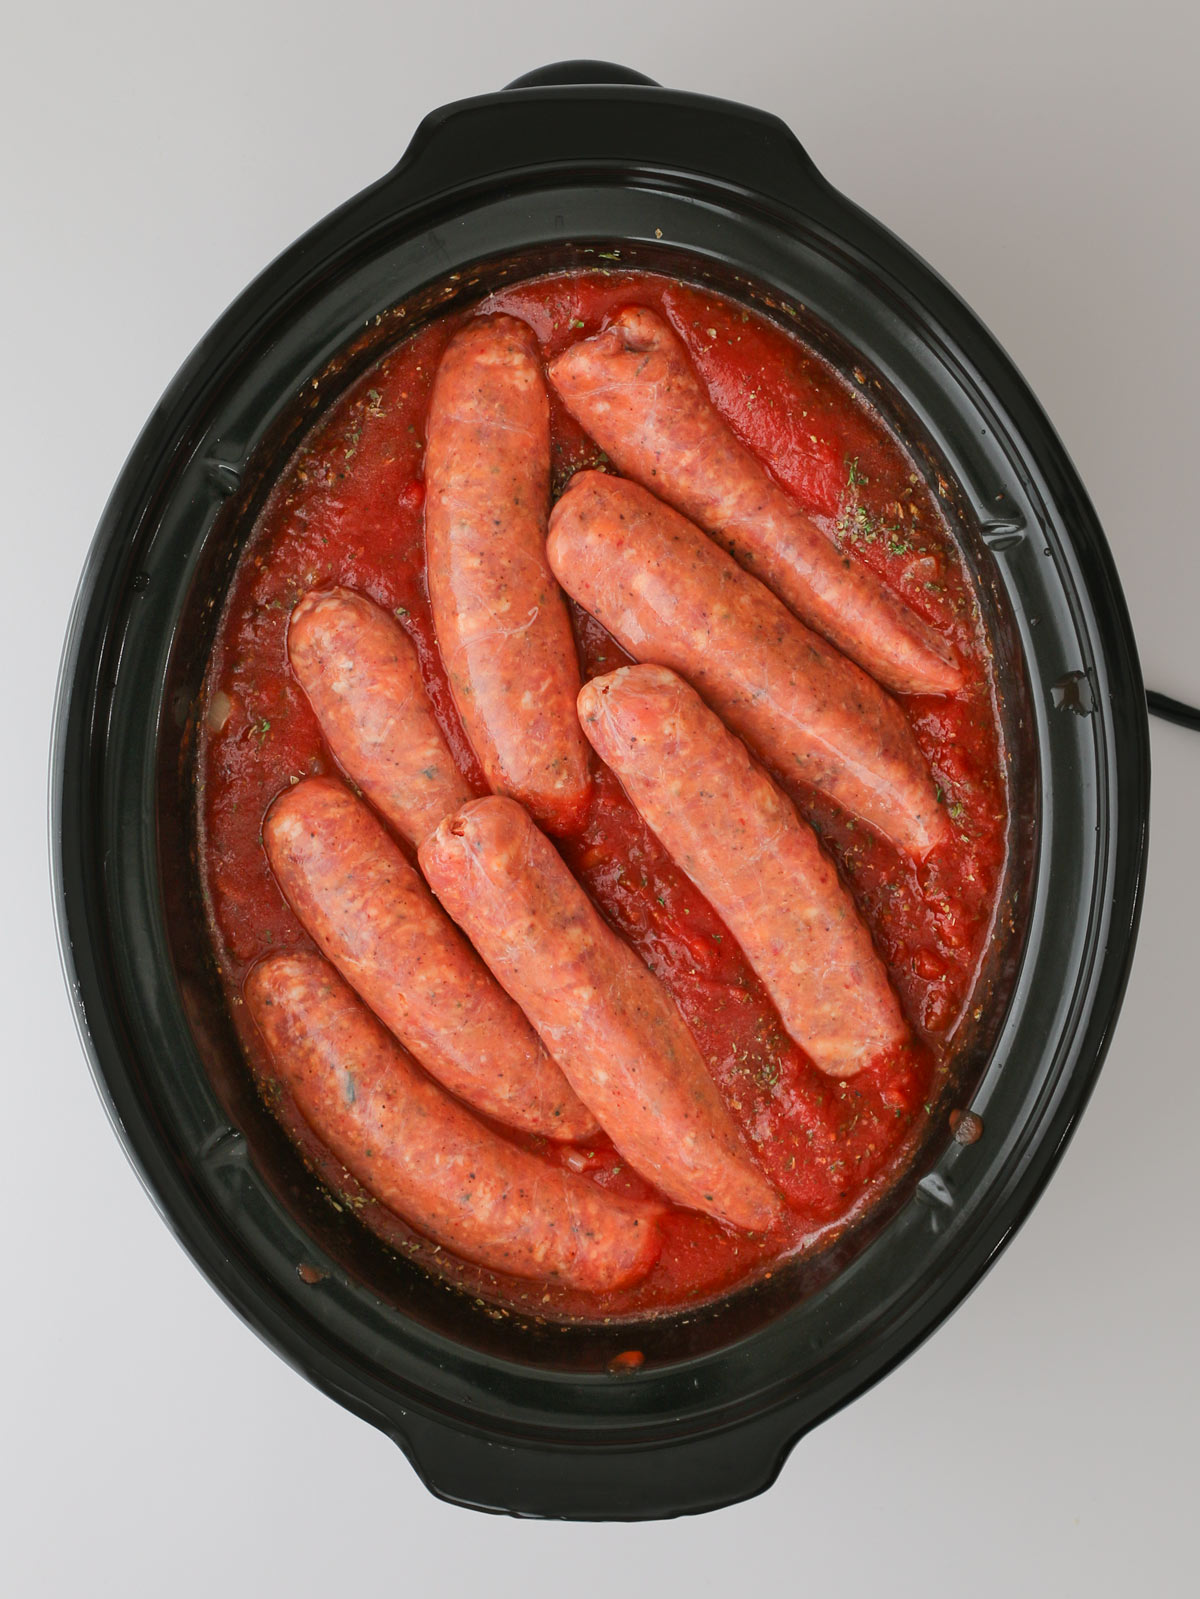 adding the sausage links to the sauce in the crockpot.